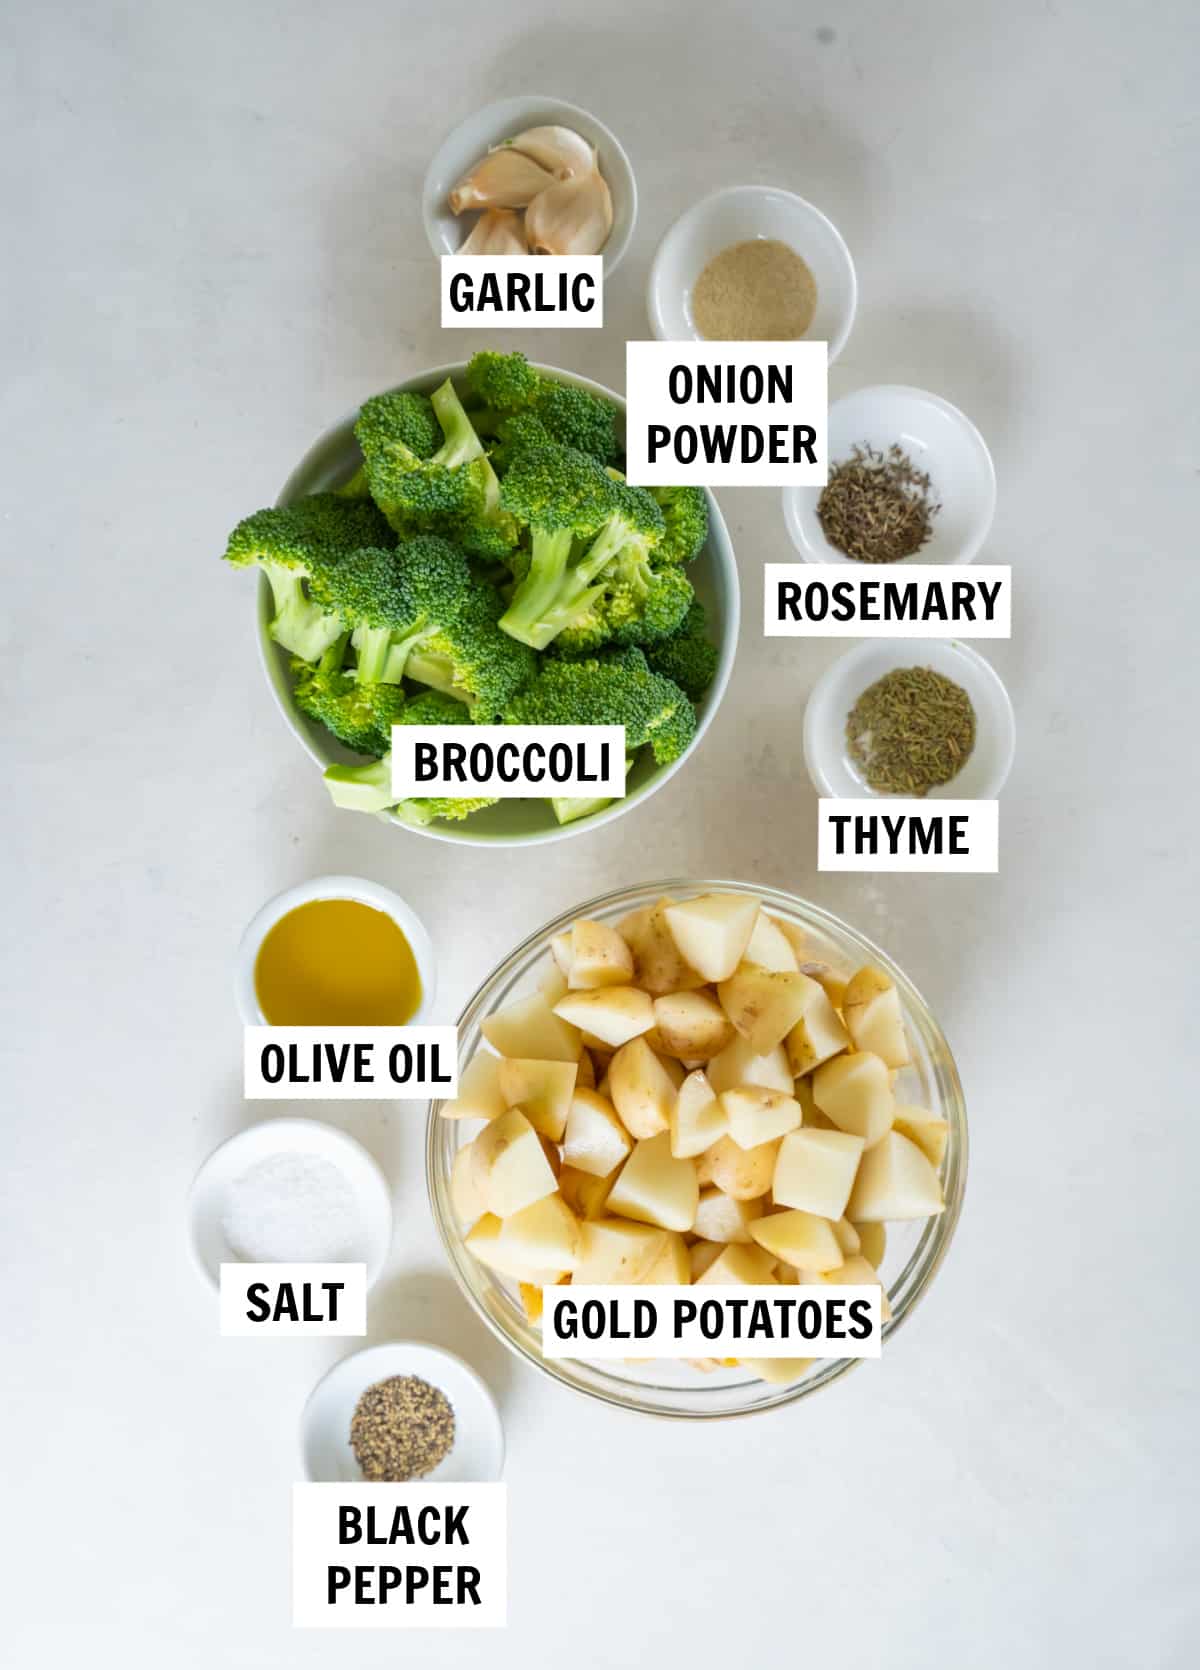 All of the ingredients for roasted potatoes and broccoli on a white countertop.